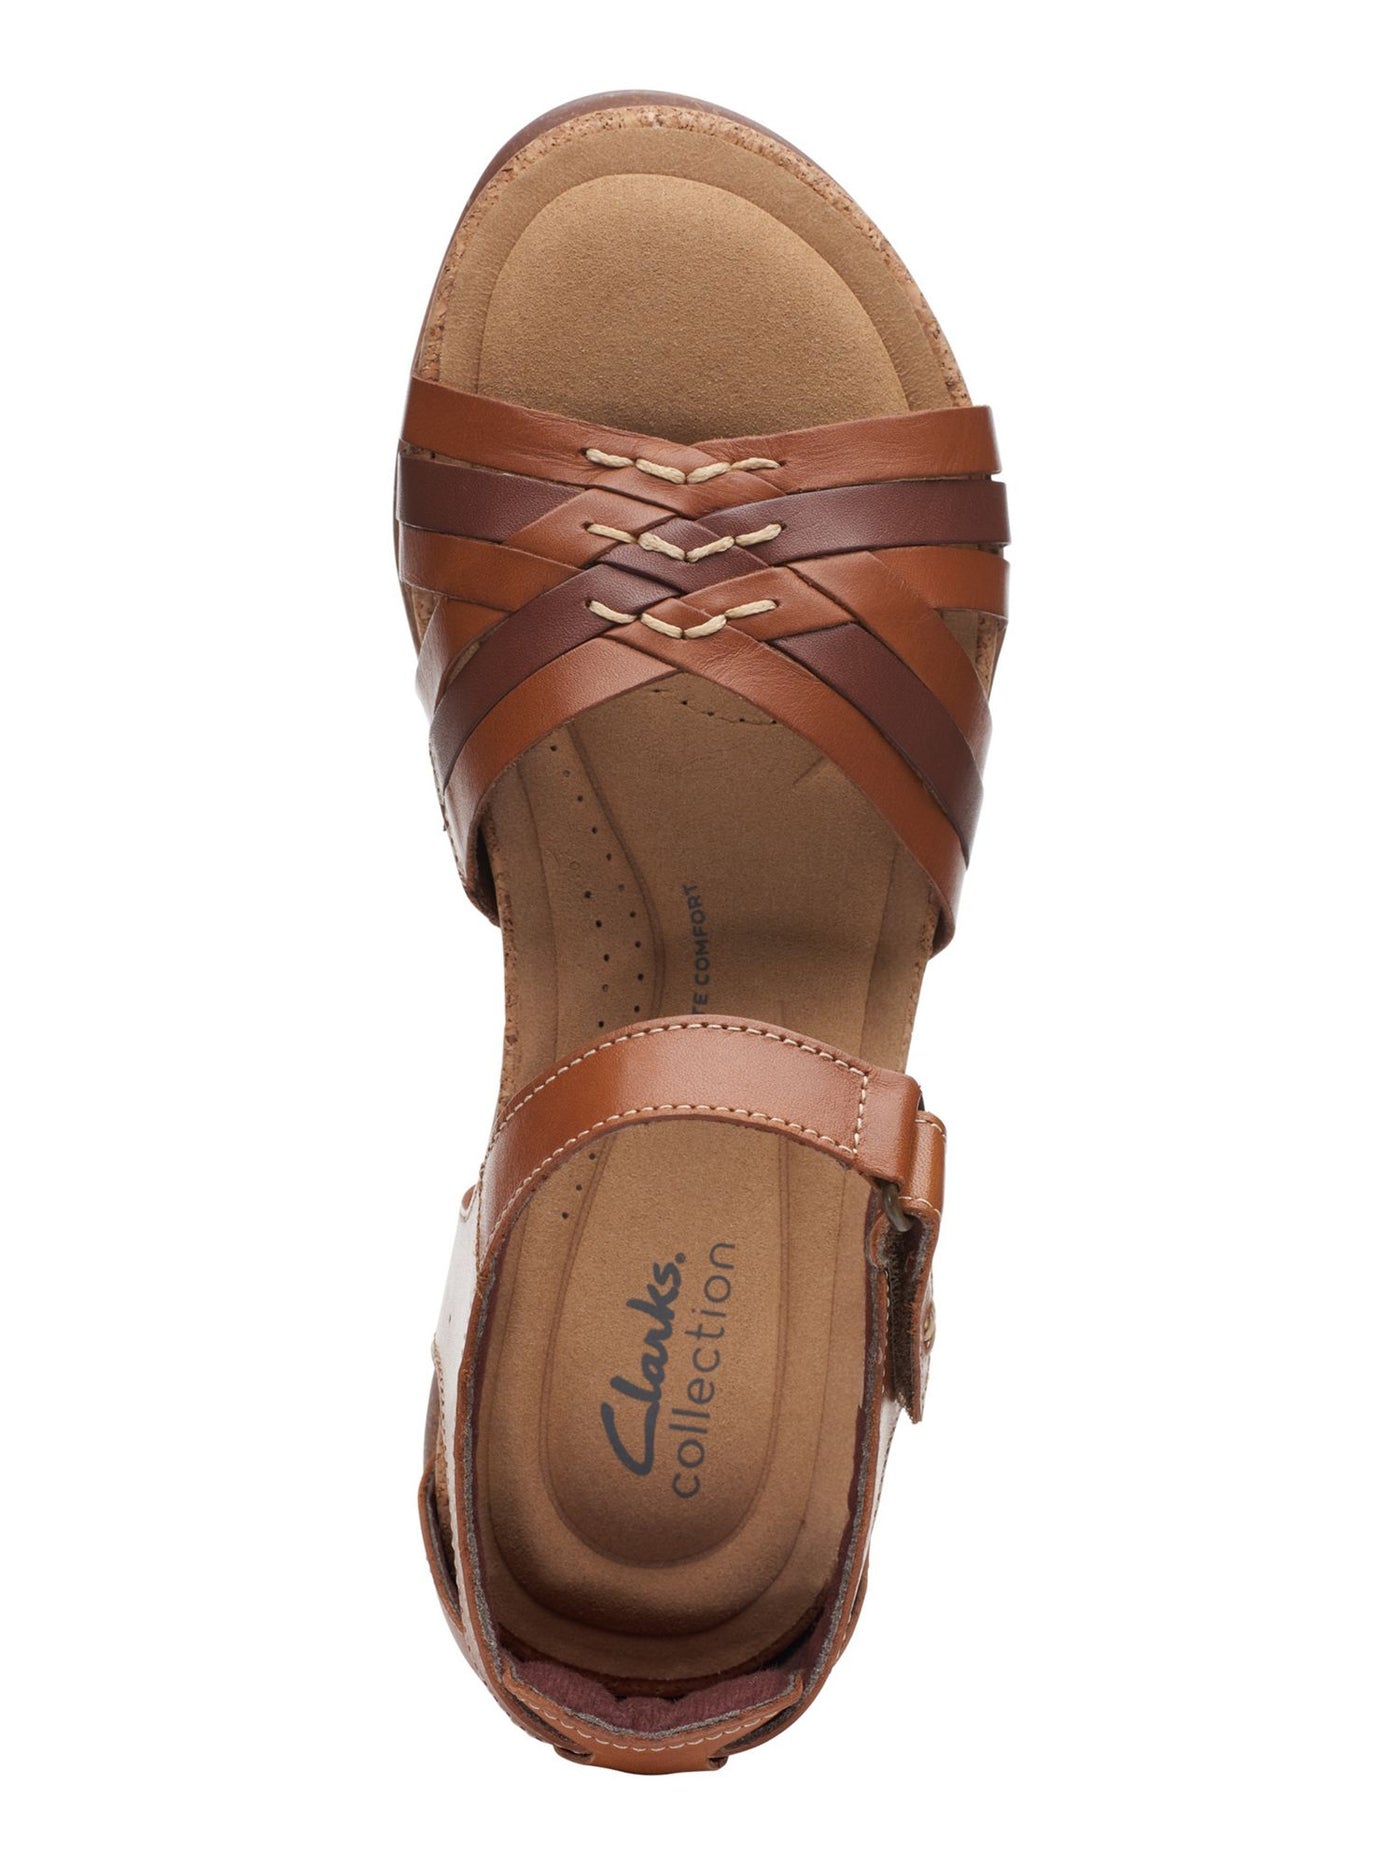 COLLECTION BY CLARKS Womens Brown Strappy Arch Support Padded Roseville Cove Round Toe Wedge Leather Sandals Shoes 7.5 M